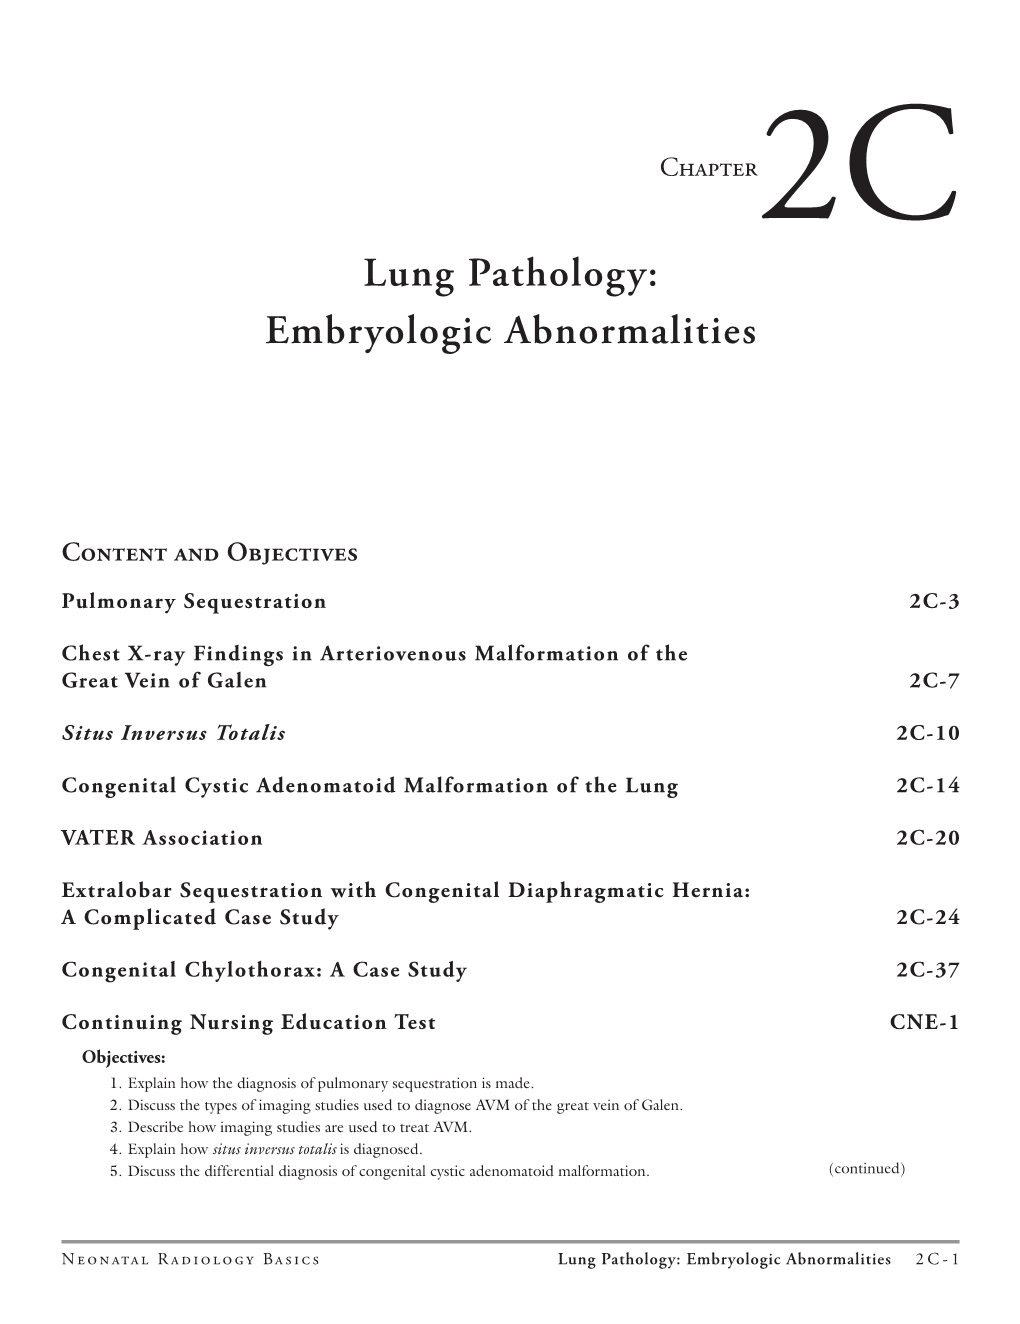 Lung Pathology: Embryologic Abnormalities